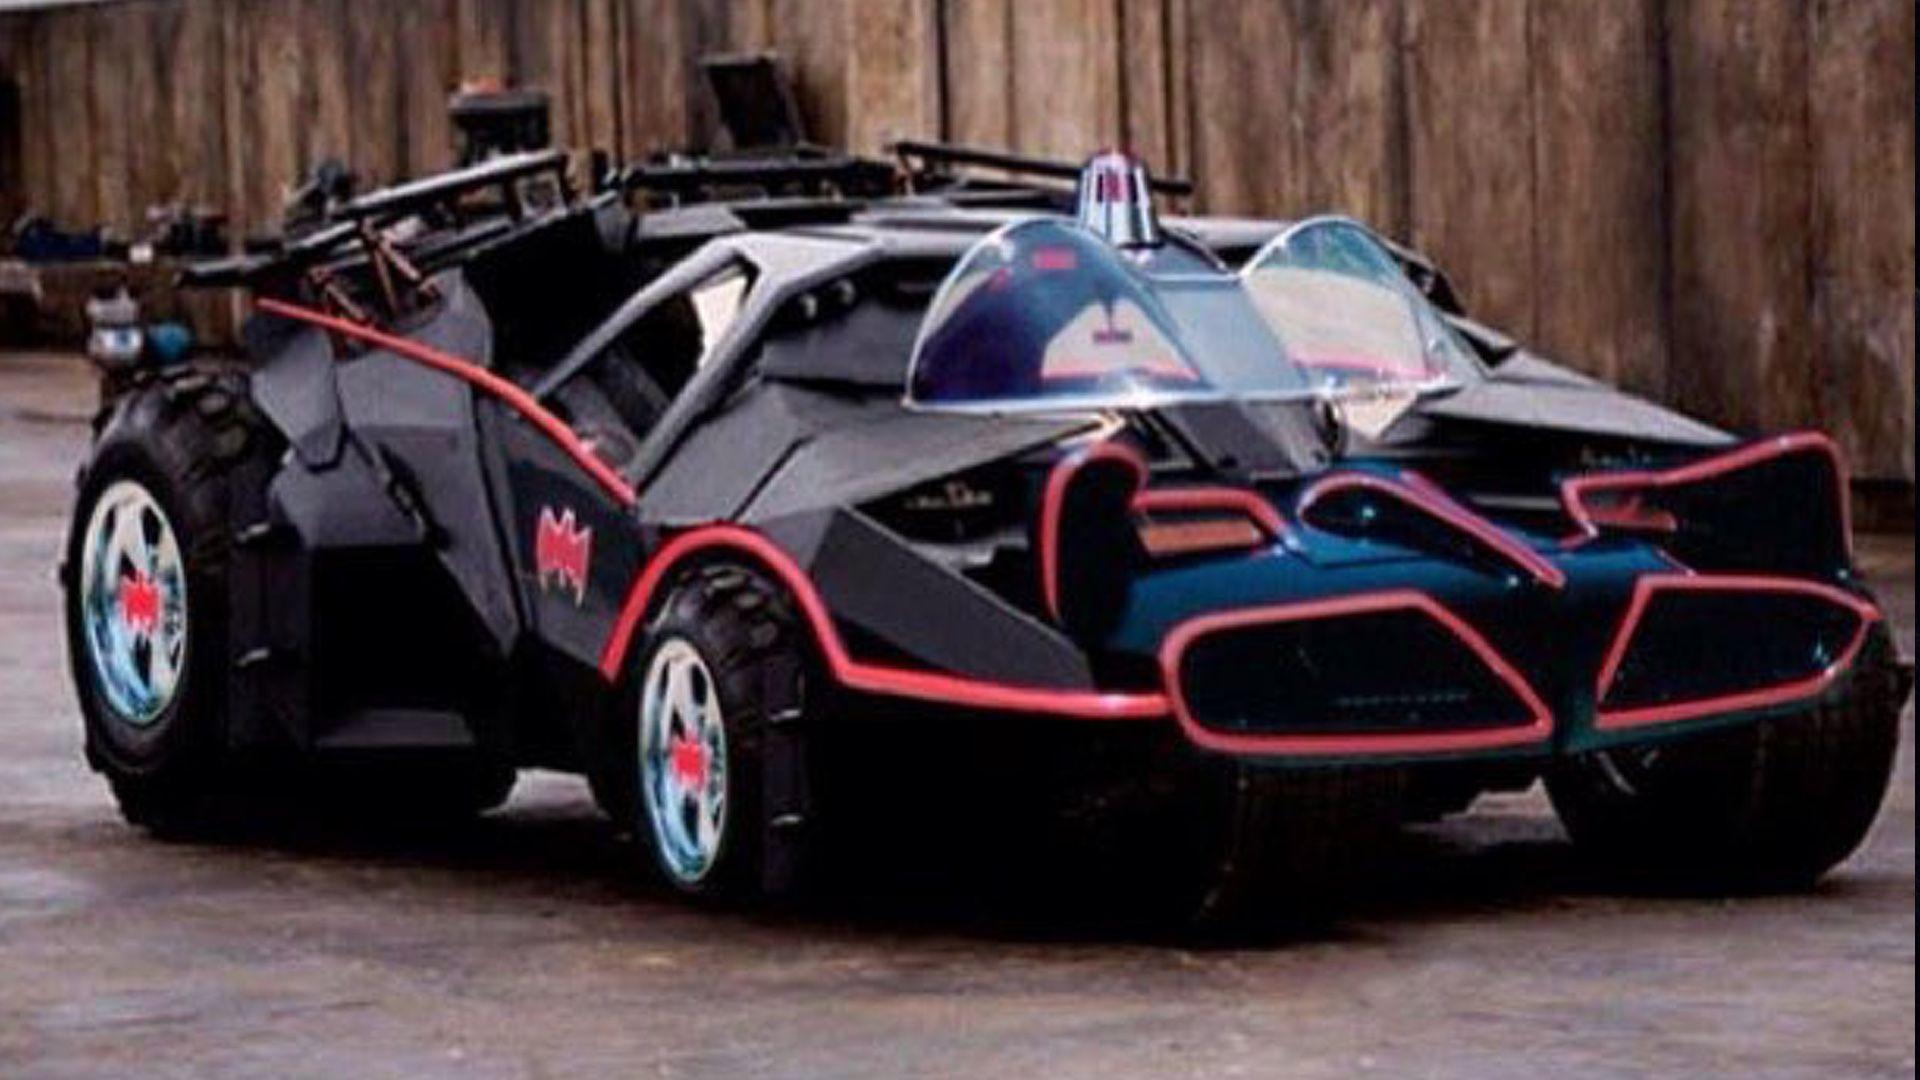 Check Out This Amazing Batmobile Mashup of The 1966 Version with